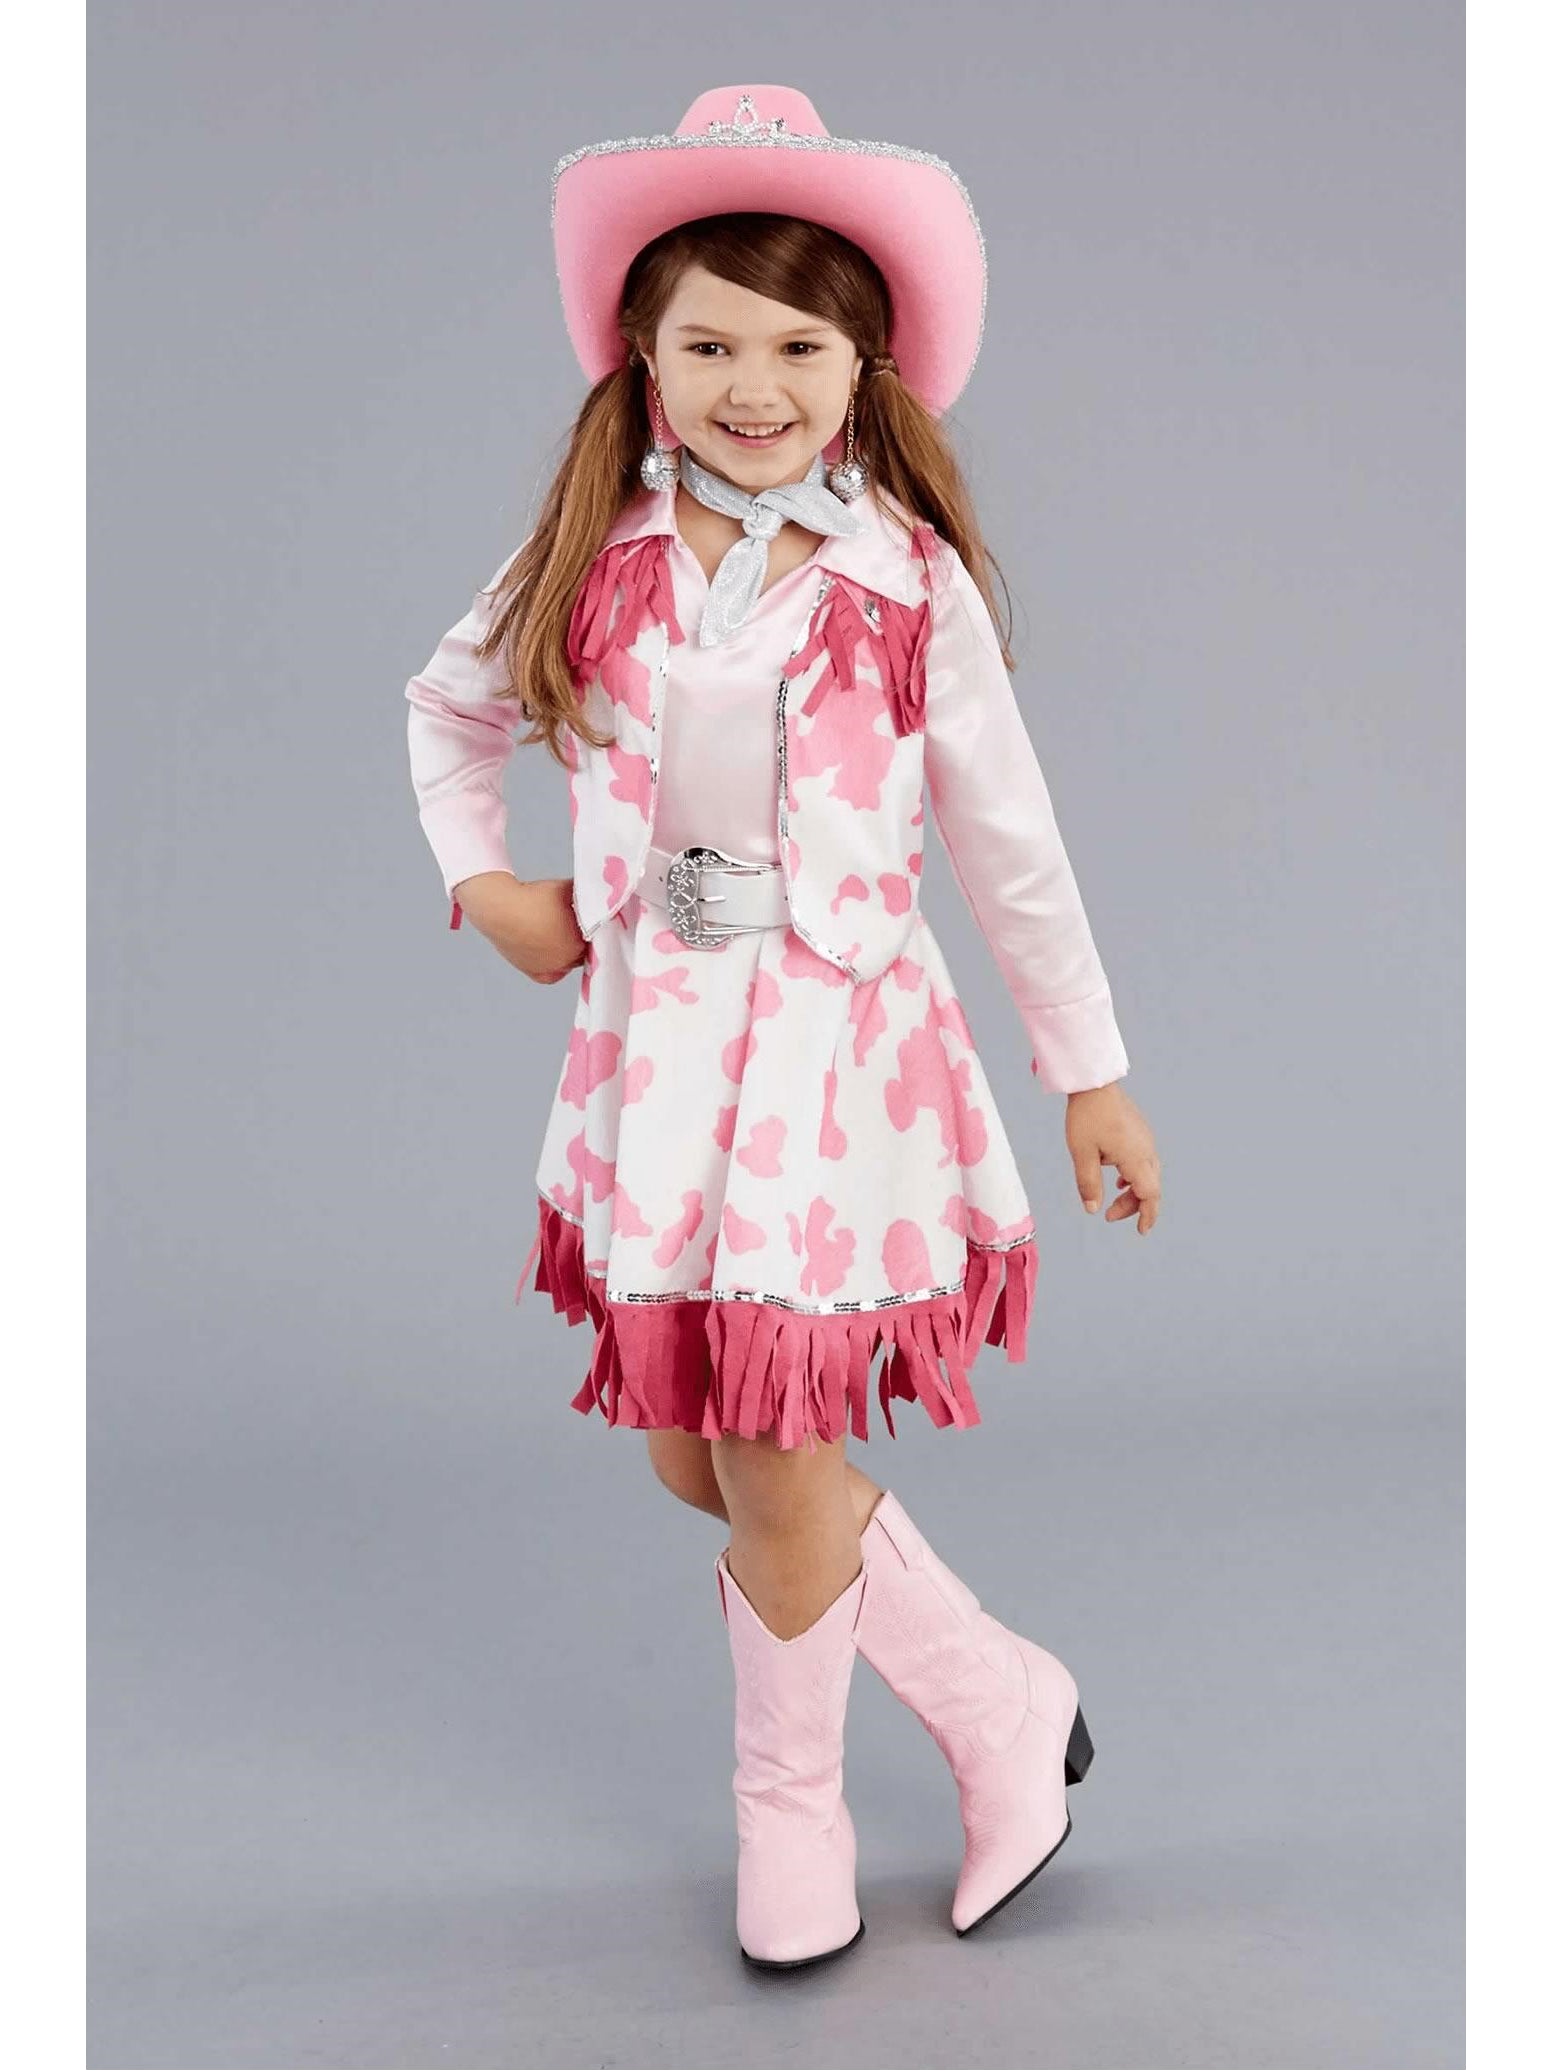 cowgirl costume for girl